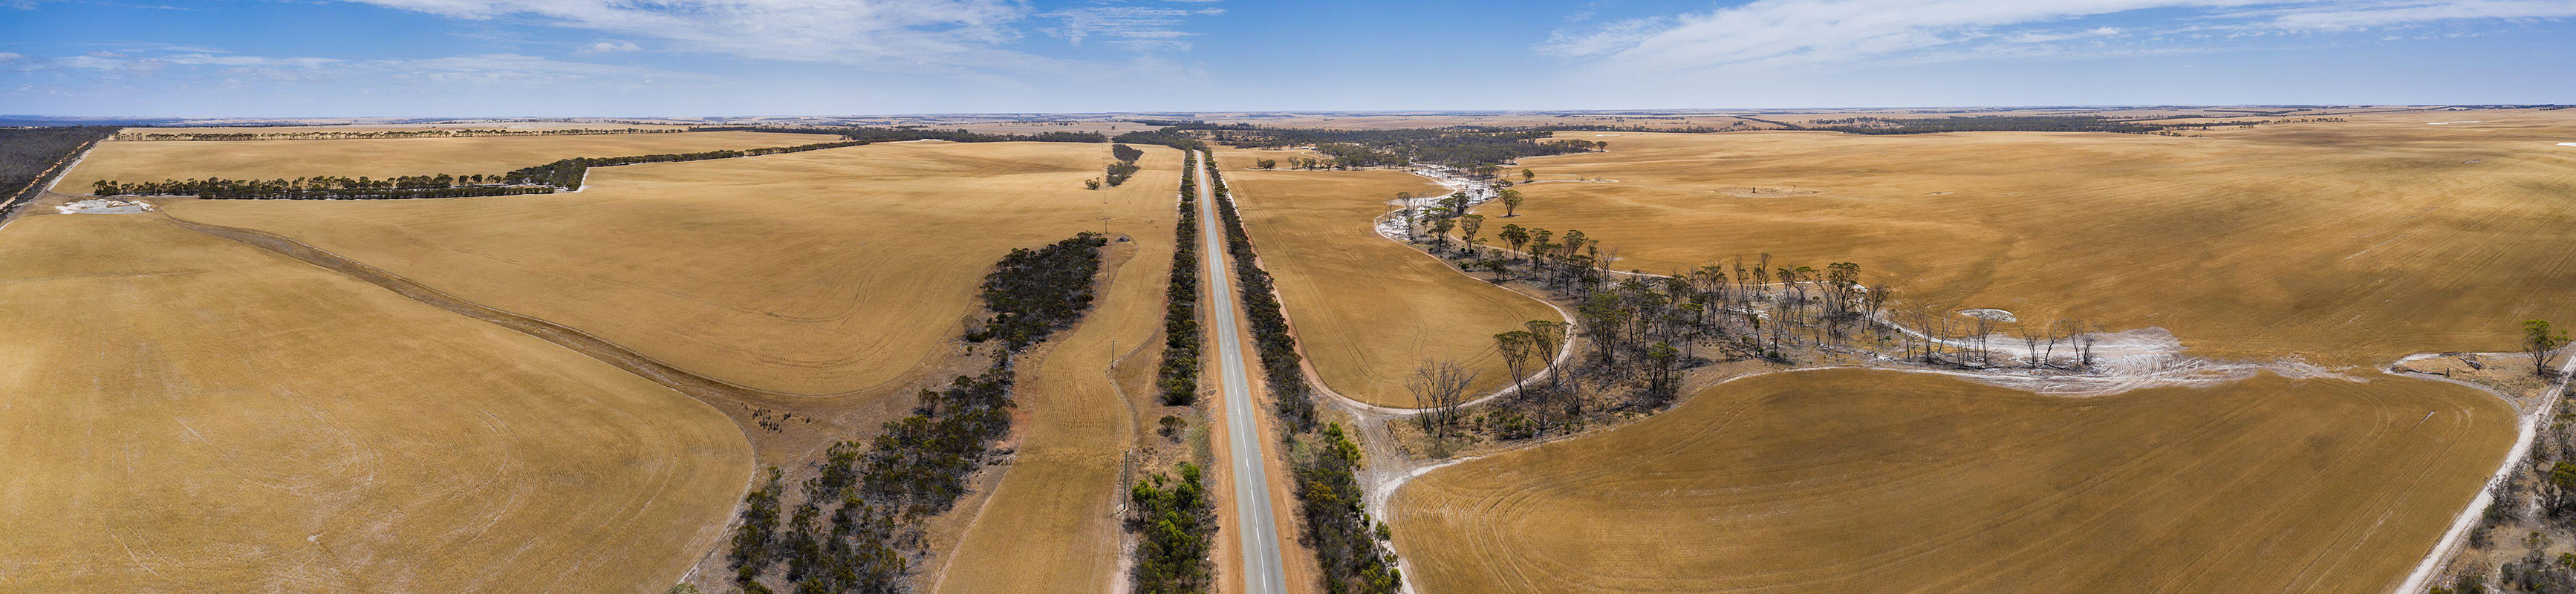 The South Coast Highway cuts through the drought-afflicted wheat belt in Western Australia.